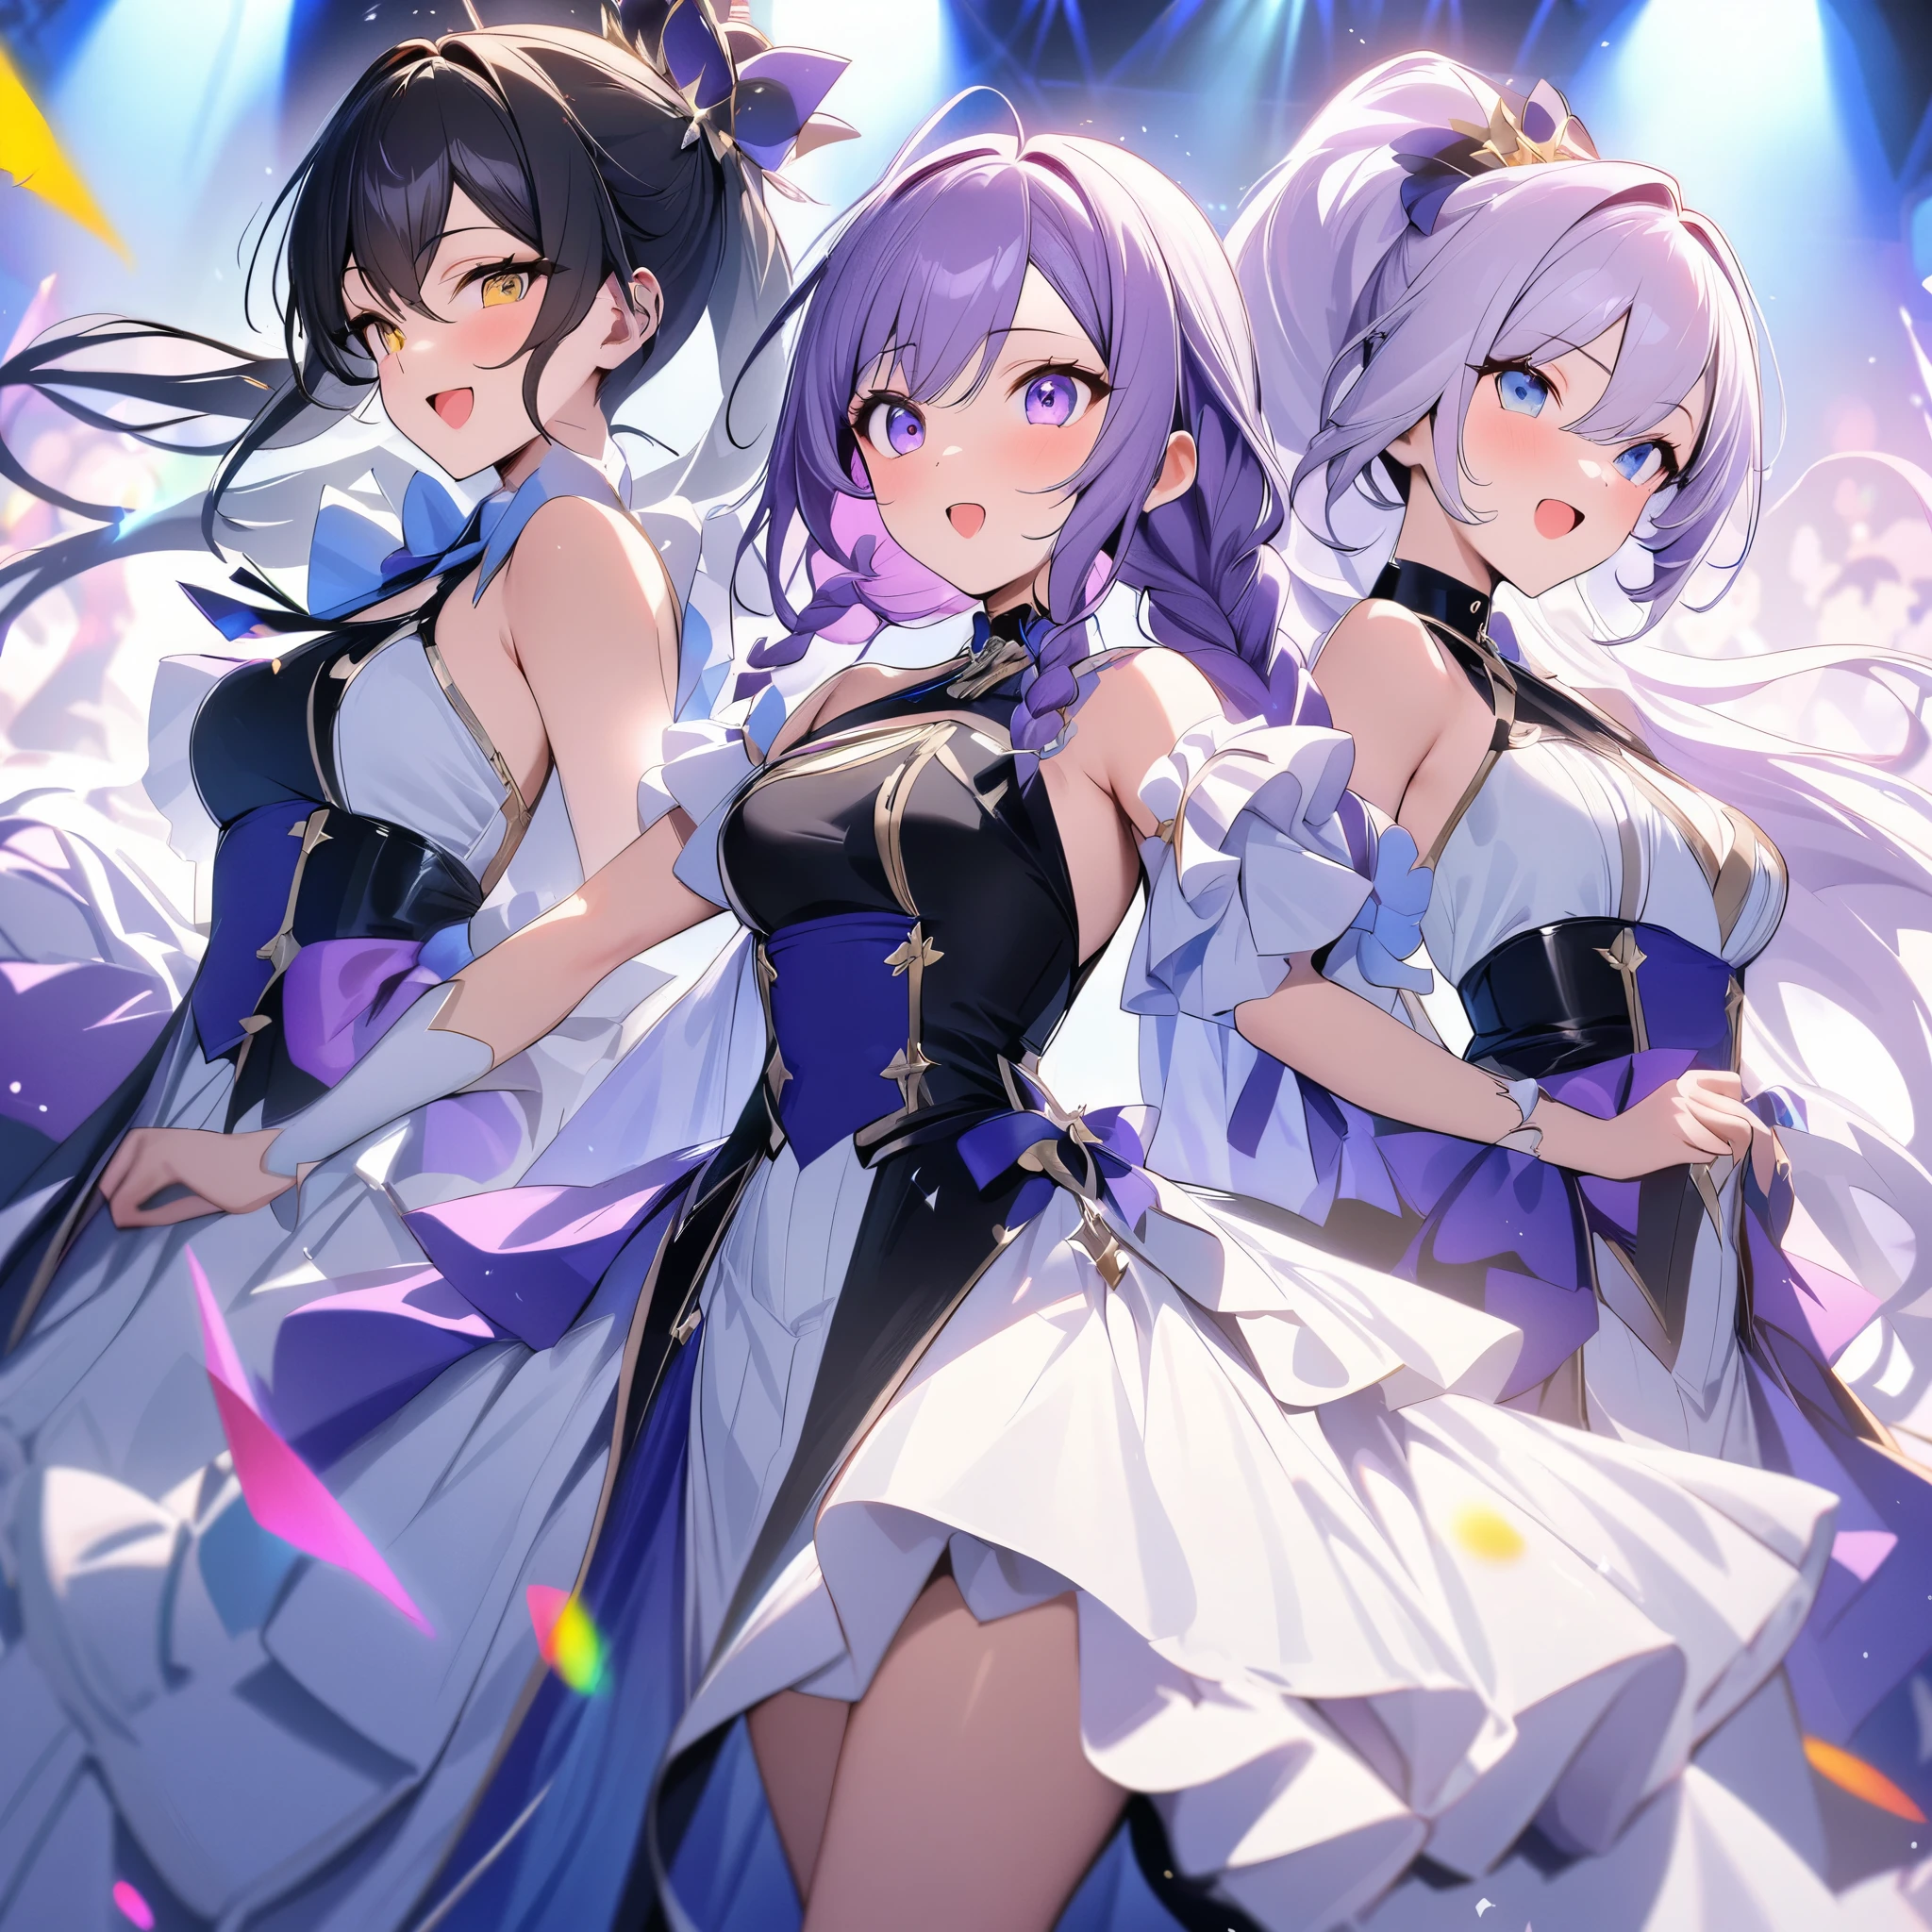 (Purple white gradient double braid long ponytail, cool, personalized, brave),(2people),(2person),(2girls side by side),(look at each other),2people,2person(multi girls),(1boy),(2rbgirl),(2girls),Idols shine brightly on stage, interpreting the charm of music with their gorgeous costumes, elegant dance moves, and affectionate eyes, leading the audience to immerse themselves in a soul shaking performance. Brilliant, dazzling, stunning, passionate, full of vitality, dreamlike, gorgeous, dazzling, charming, colorful, lively, vibrant, captivating, visually grand, dynamic, passionate, and full of tension, passionate burning, and colorful,(masterpiece, best quality:1.2)